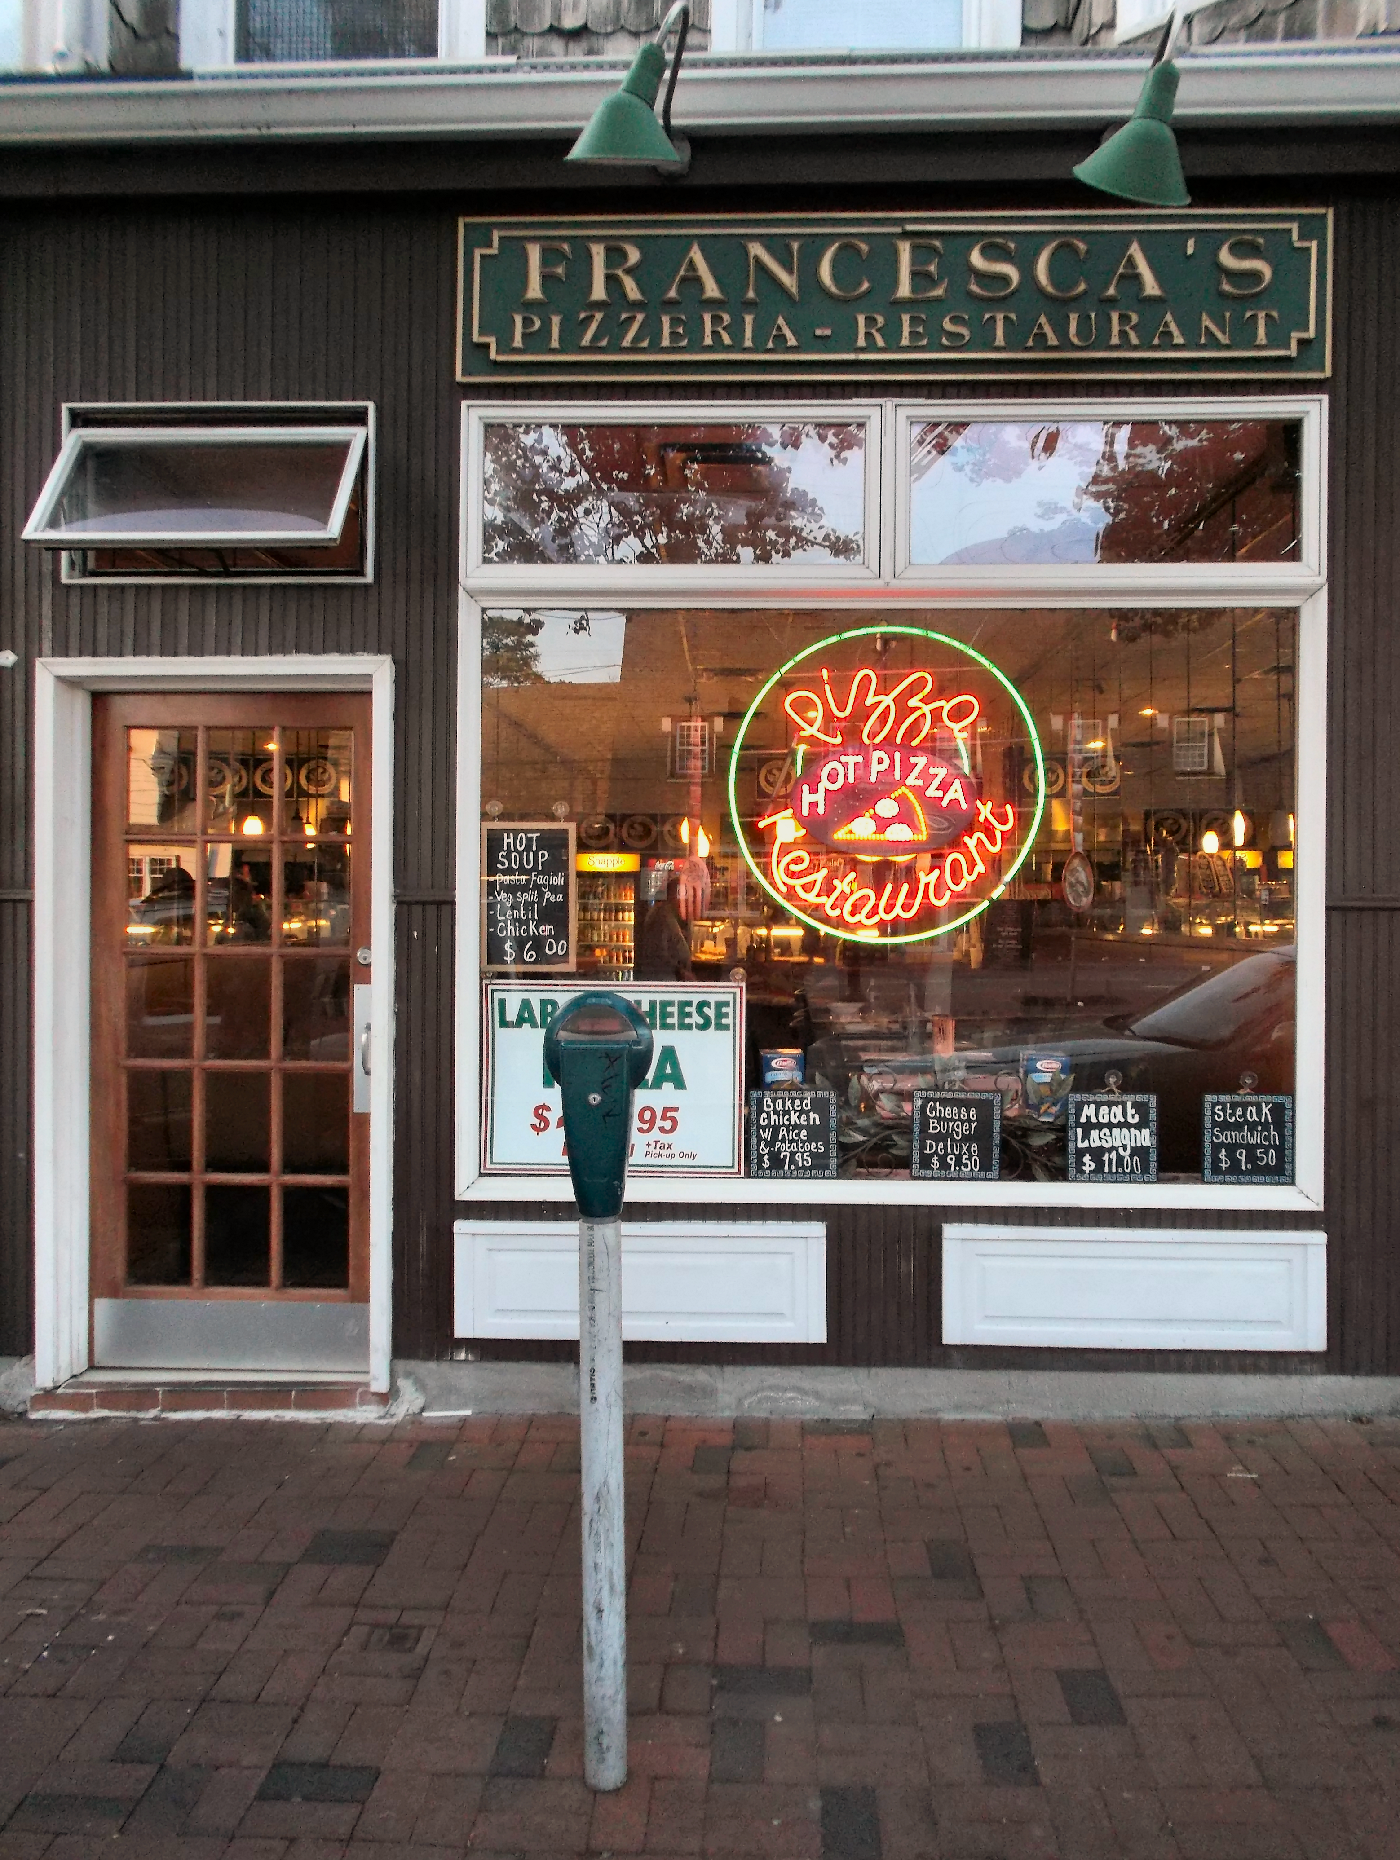 The BEST Pizza in Great Neck! Francesca's Pizzeria and Restaurant in Great Neck Plaza, NY